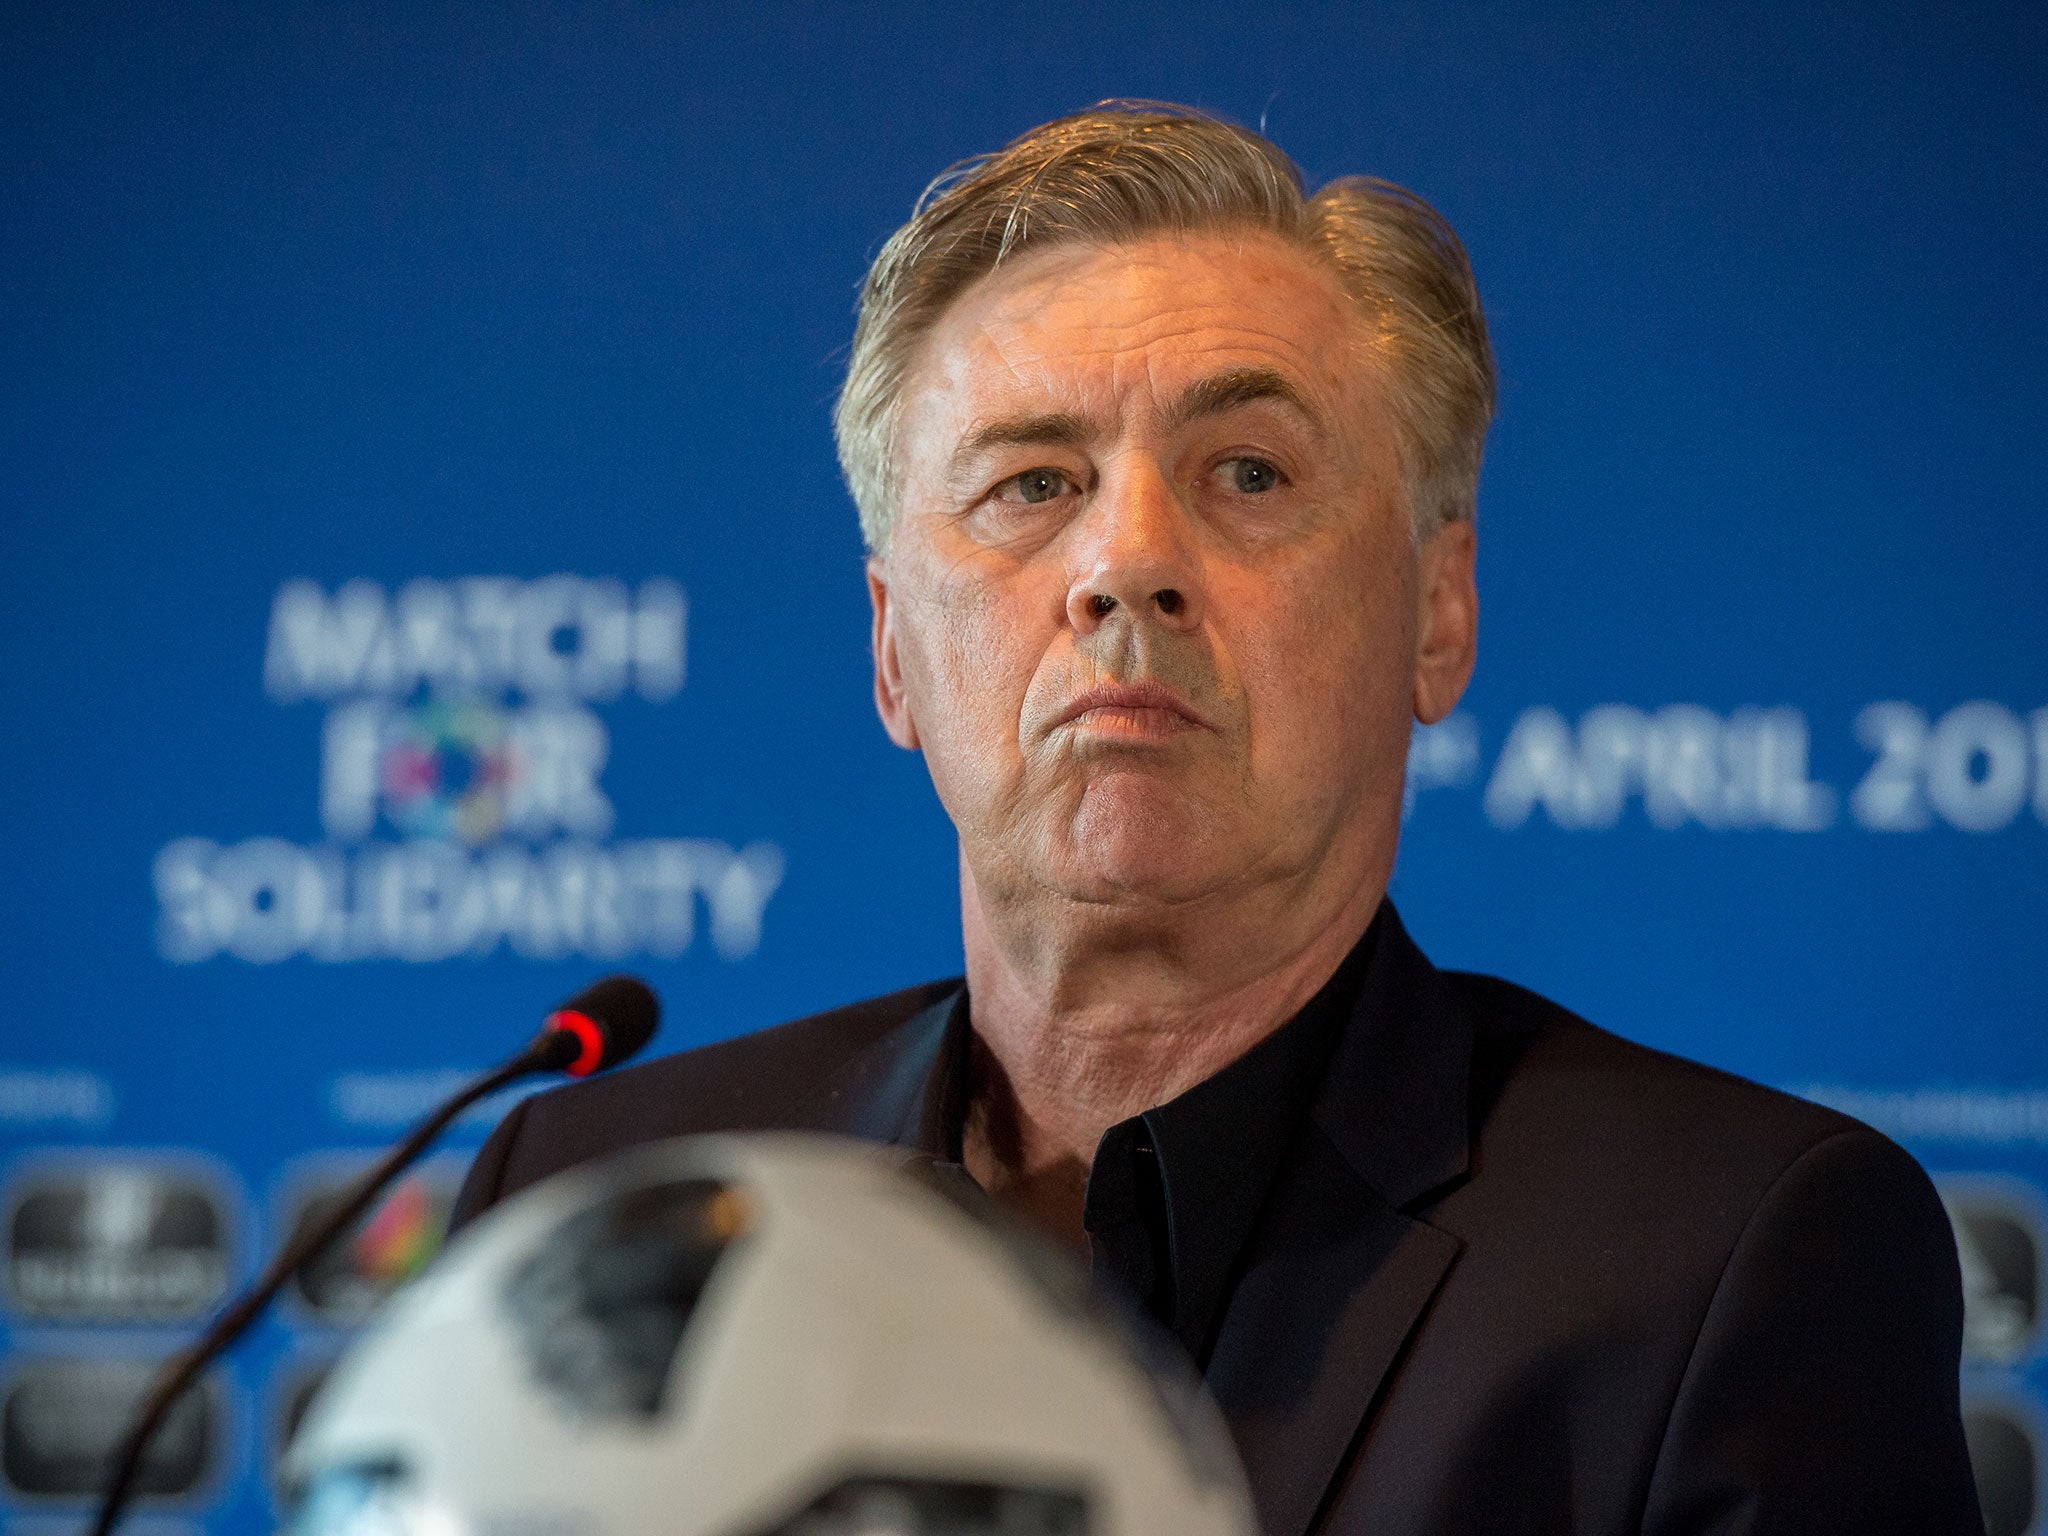 Well-travelled Ancelotti had been touted as the next Italy head coach until Roberto Mancini was installed earlier this month